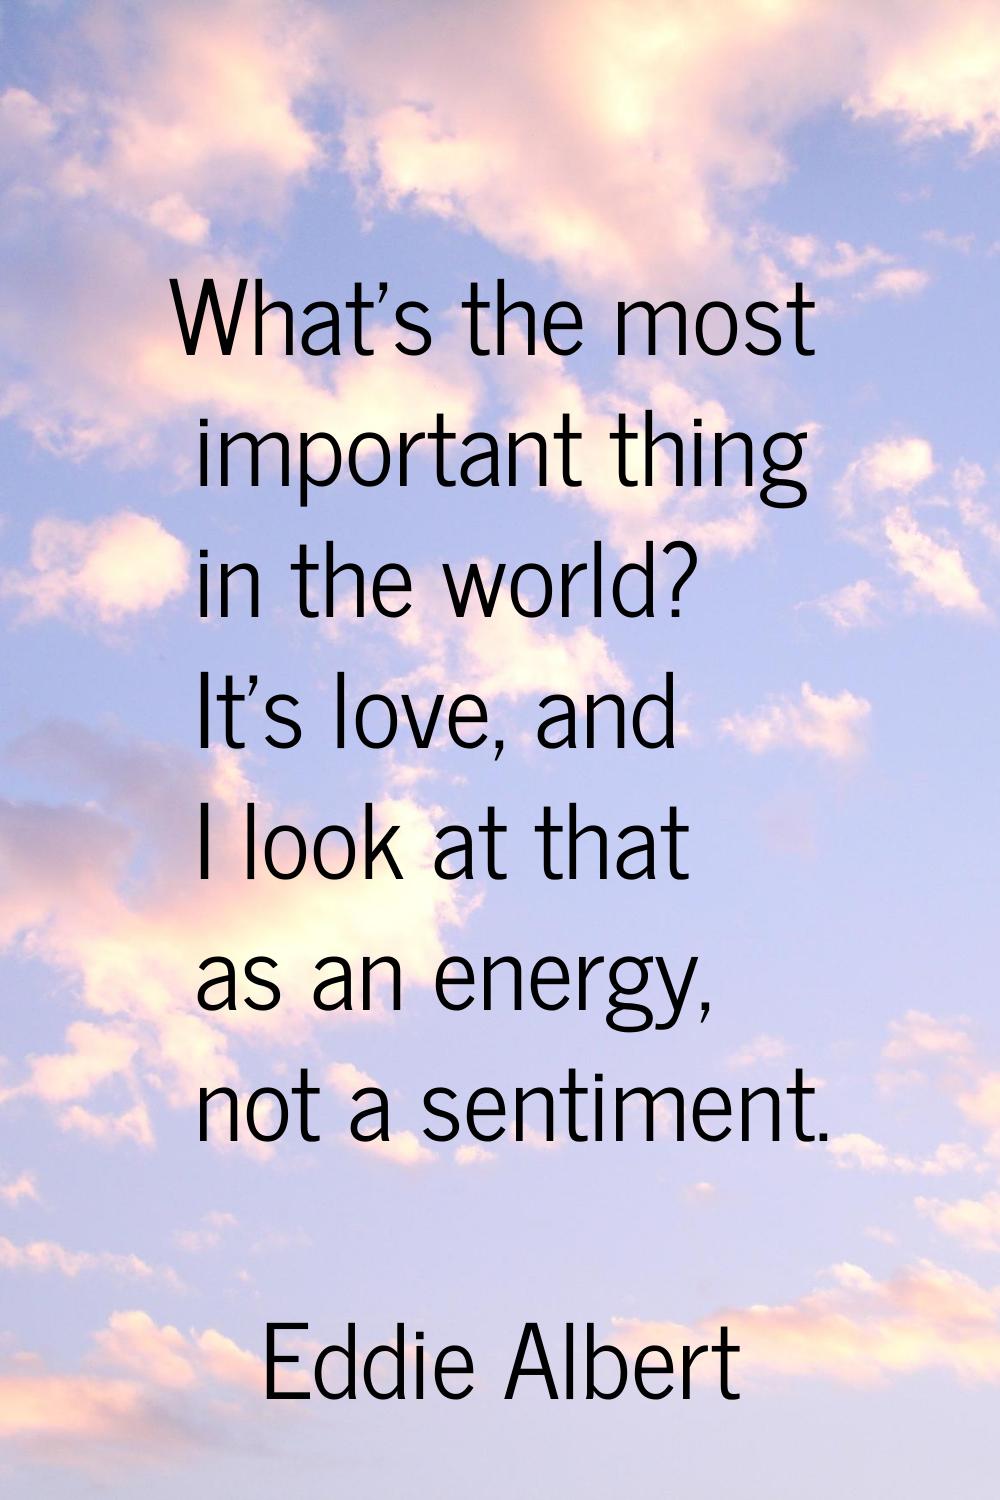 What's the most important thing in the world? It's love, and I look at that as an energy, not a sen